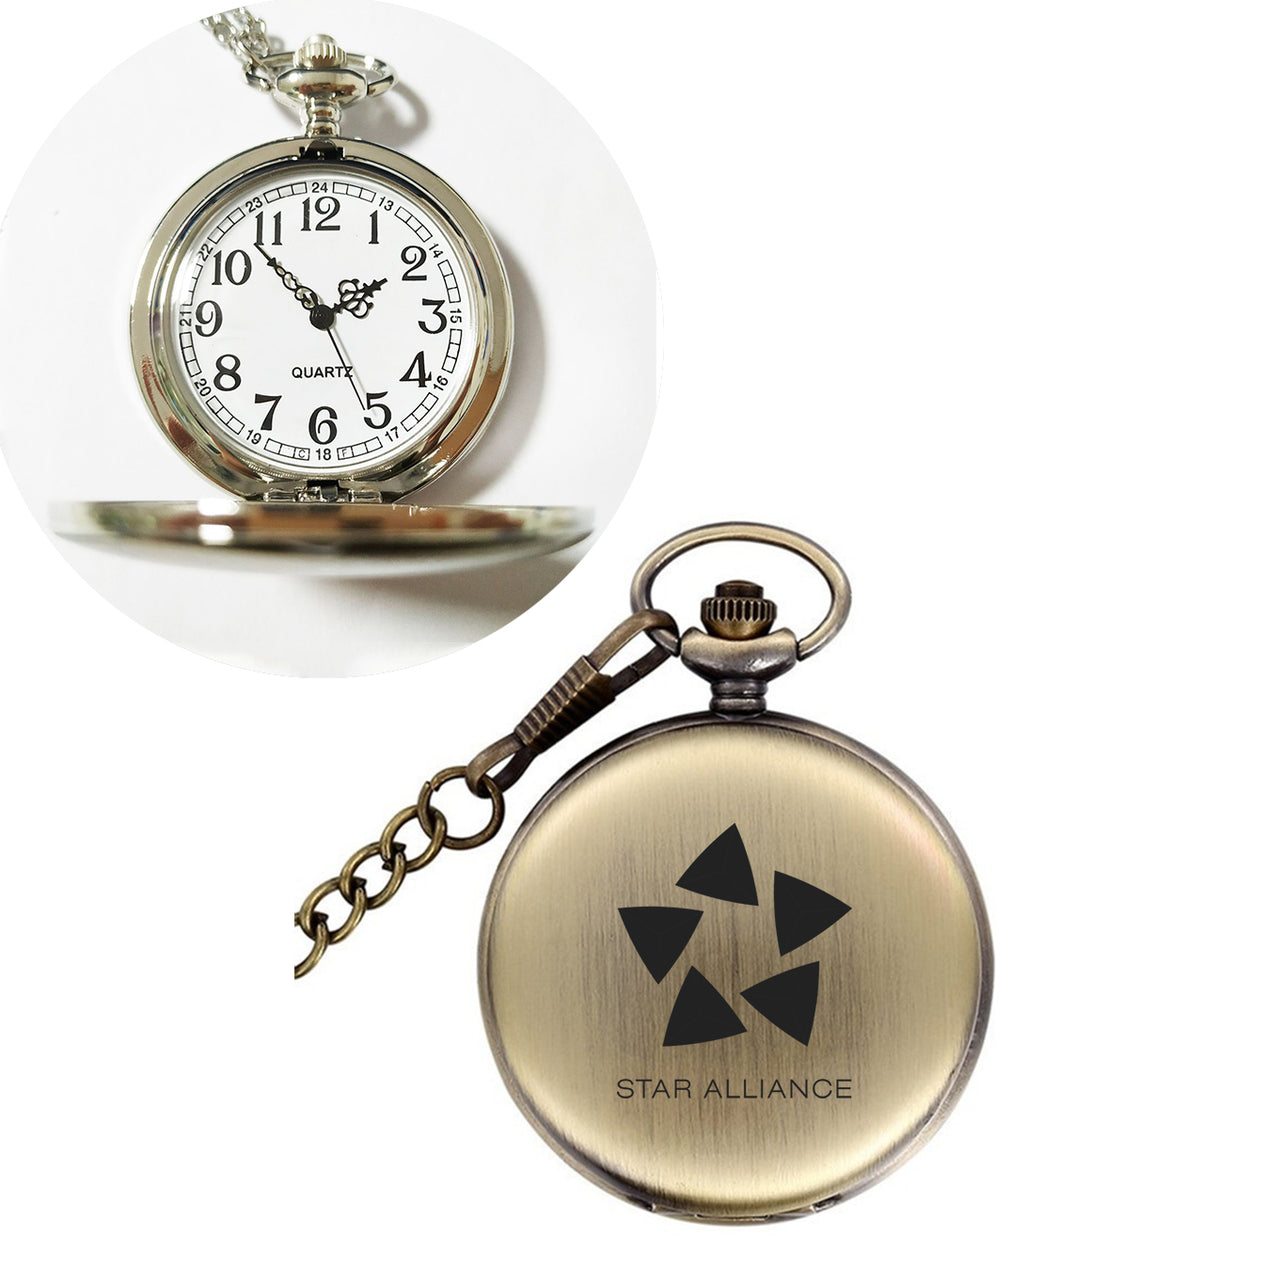 Star Alliance Airlines Designed Pocket Watches